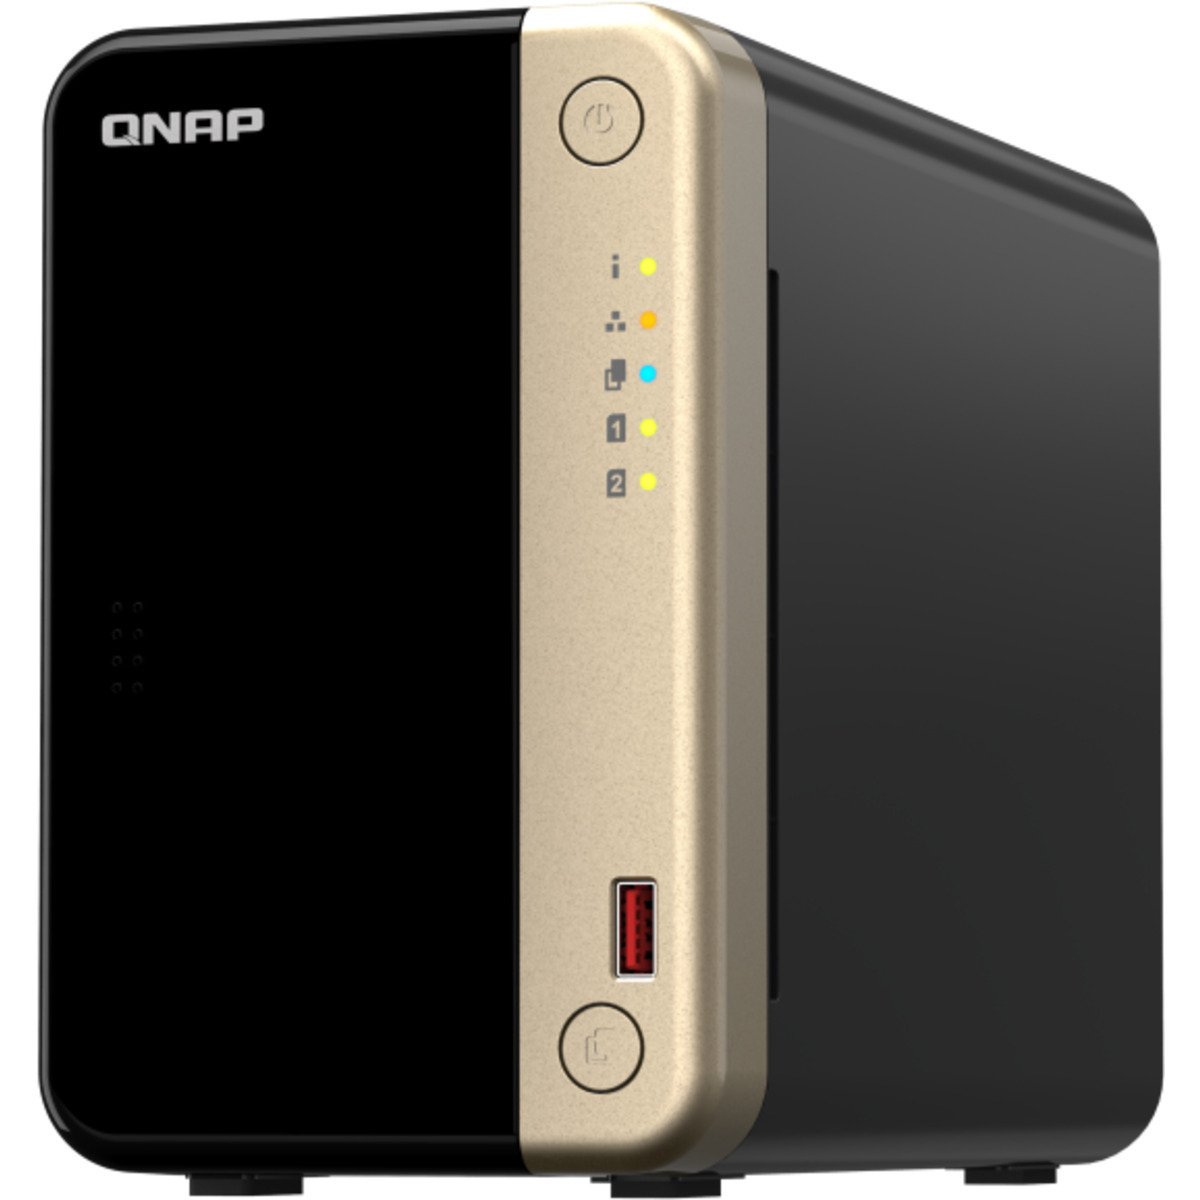 QNAP TS-264 12tb 2-Bay Desktop Multimedia / Power User / Business NAS - Network Attached Storage Device 2x6tb Western Digital Red Plus WD60EFPX 3.5 5640rpm SATA 6Gb/s HDD NAS Class Drives Installed - Burn-In Tested - ON SALE TS-264